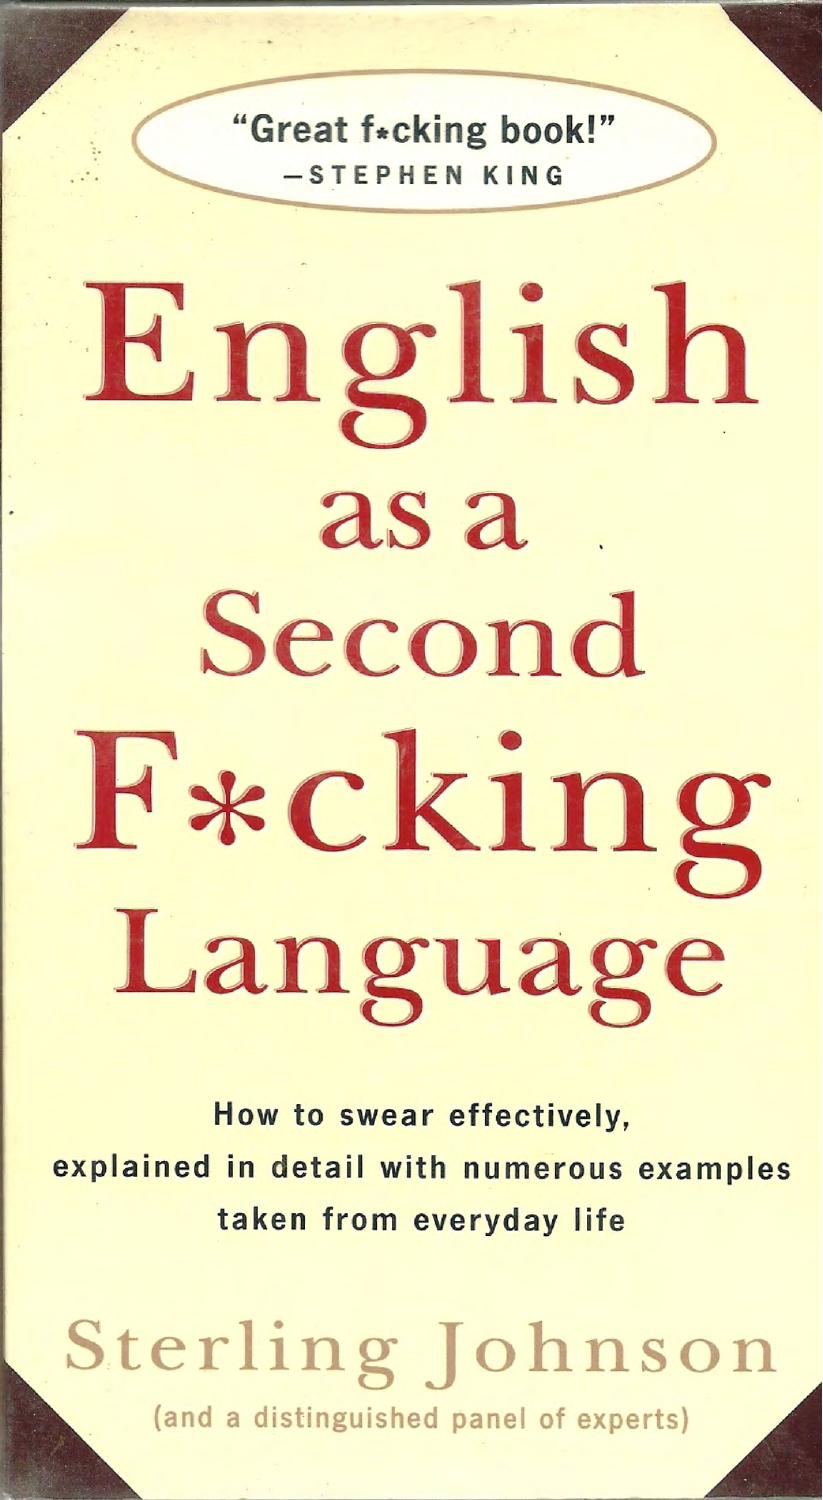 English as a Second F*cking Language: How to Swear Effectively, Explained in Detail with Numerous Examples Taken From Everyday Life